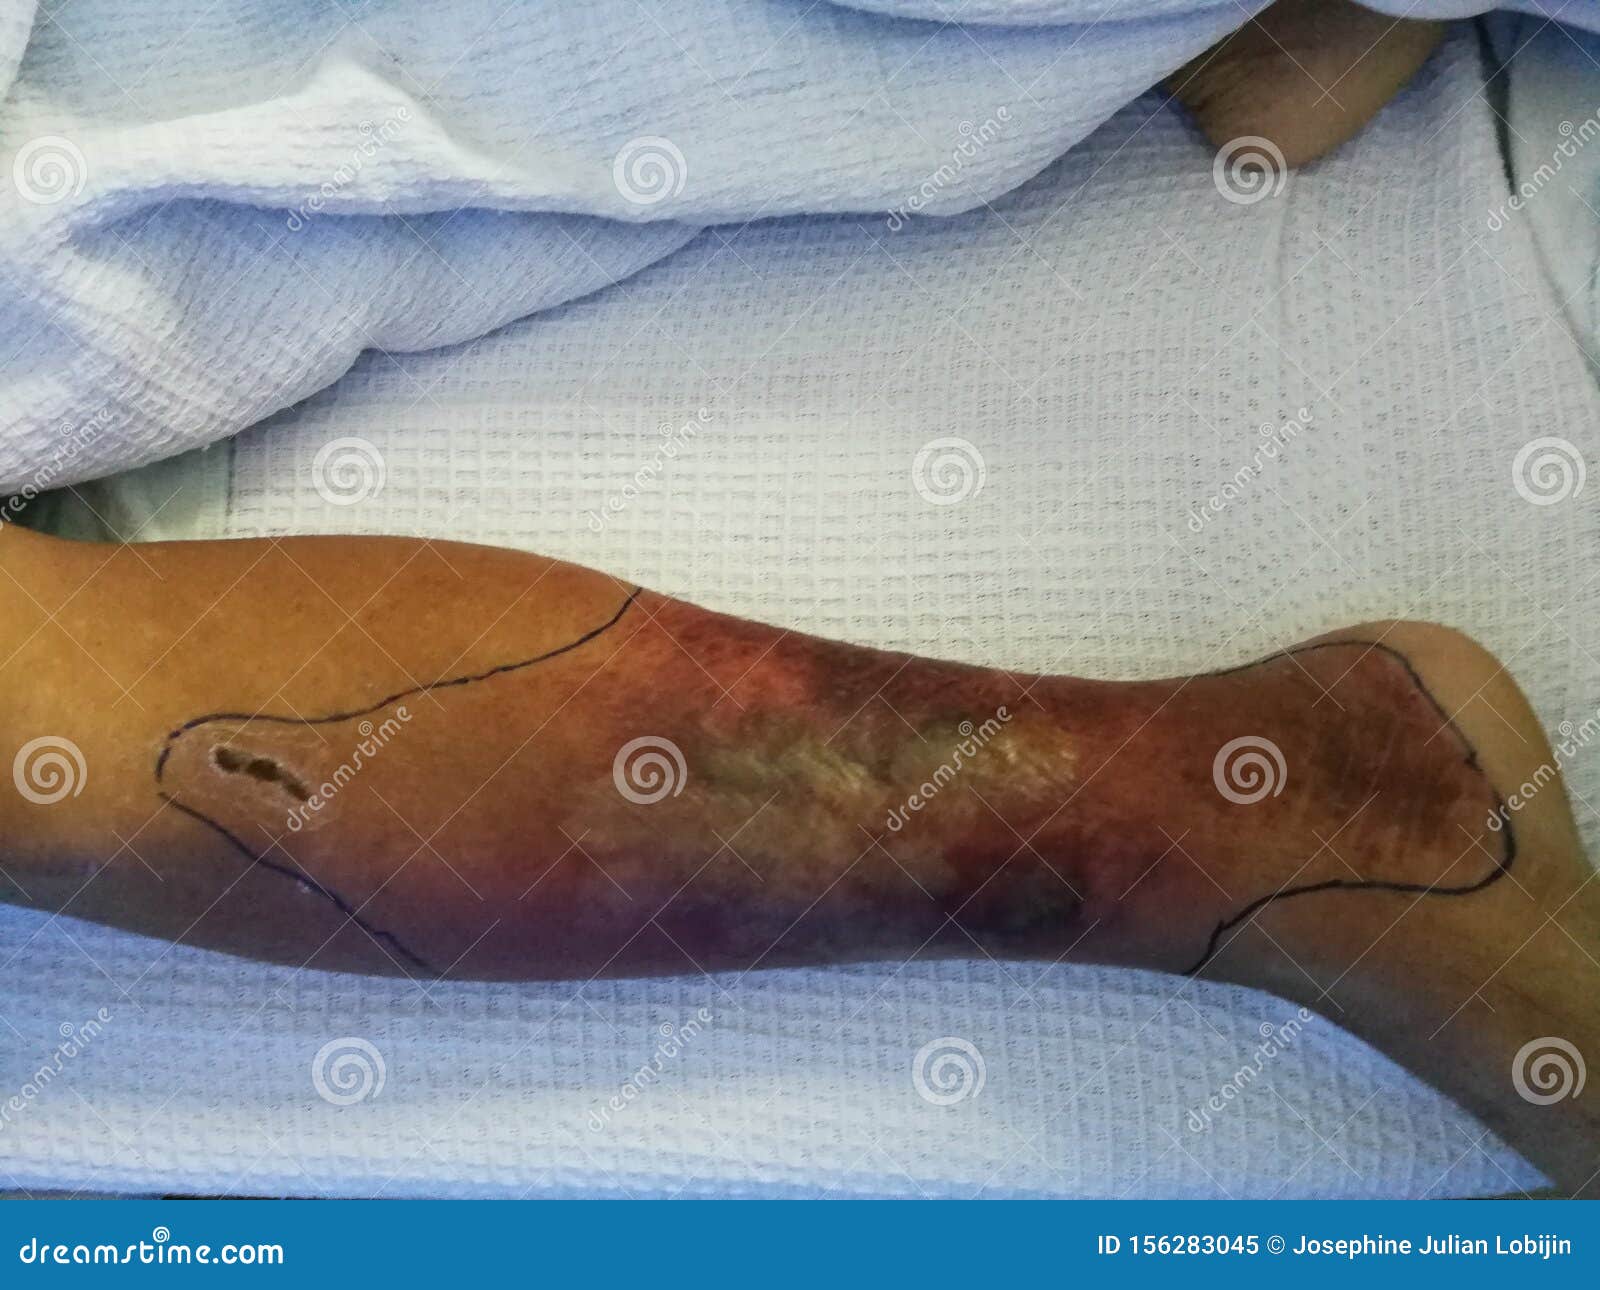 a diabetes patient resting on bed and with the leg swelling and redness symptoms.